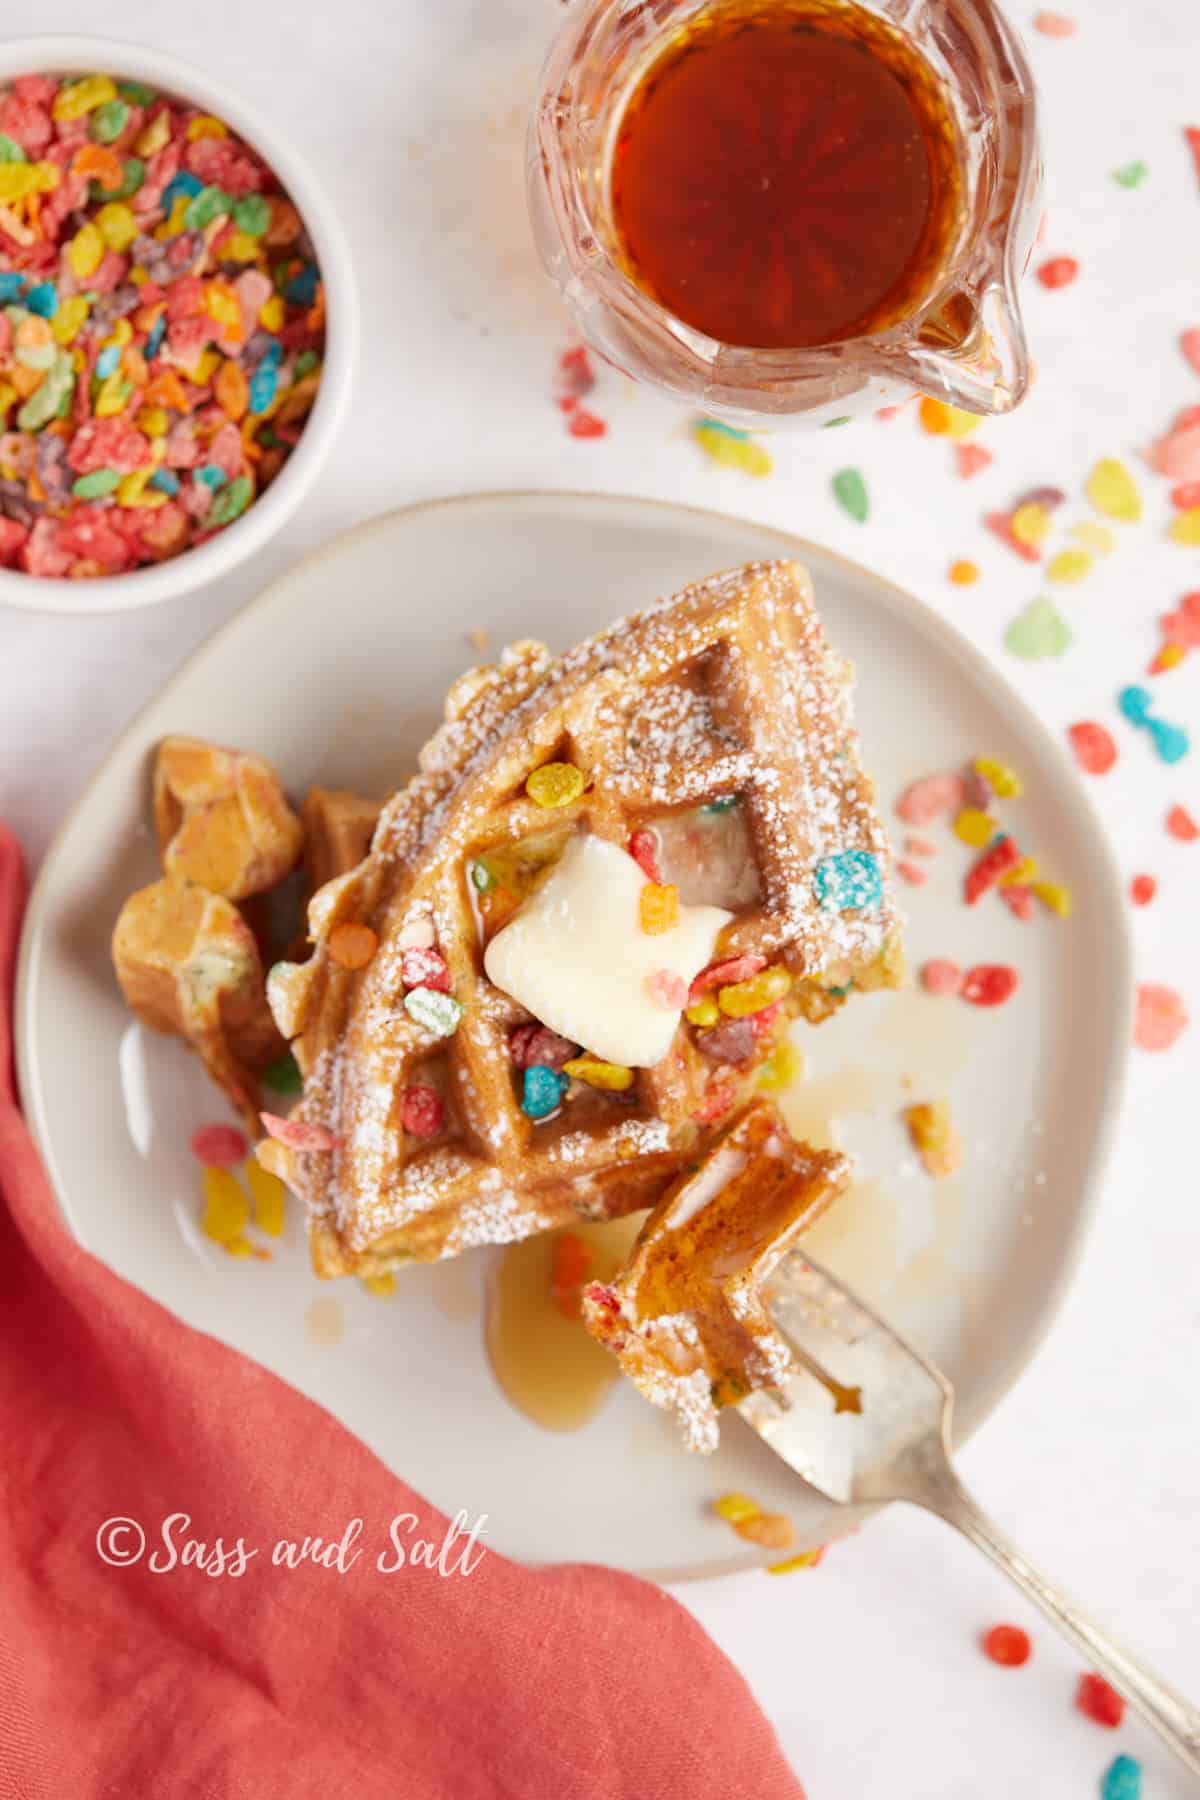 A decadent serving of Fruity Pebbles waffles topped with melting butter, drizzled with golden syrup, ready to be enjoyed alongside a cup of warm amber maple syrup.